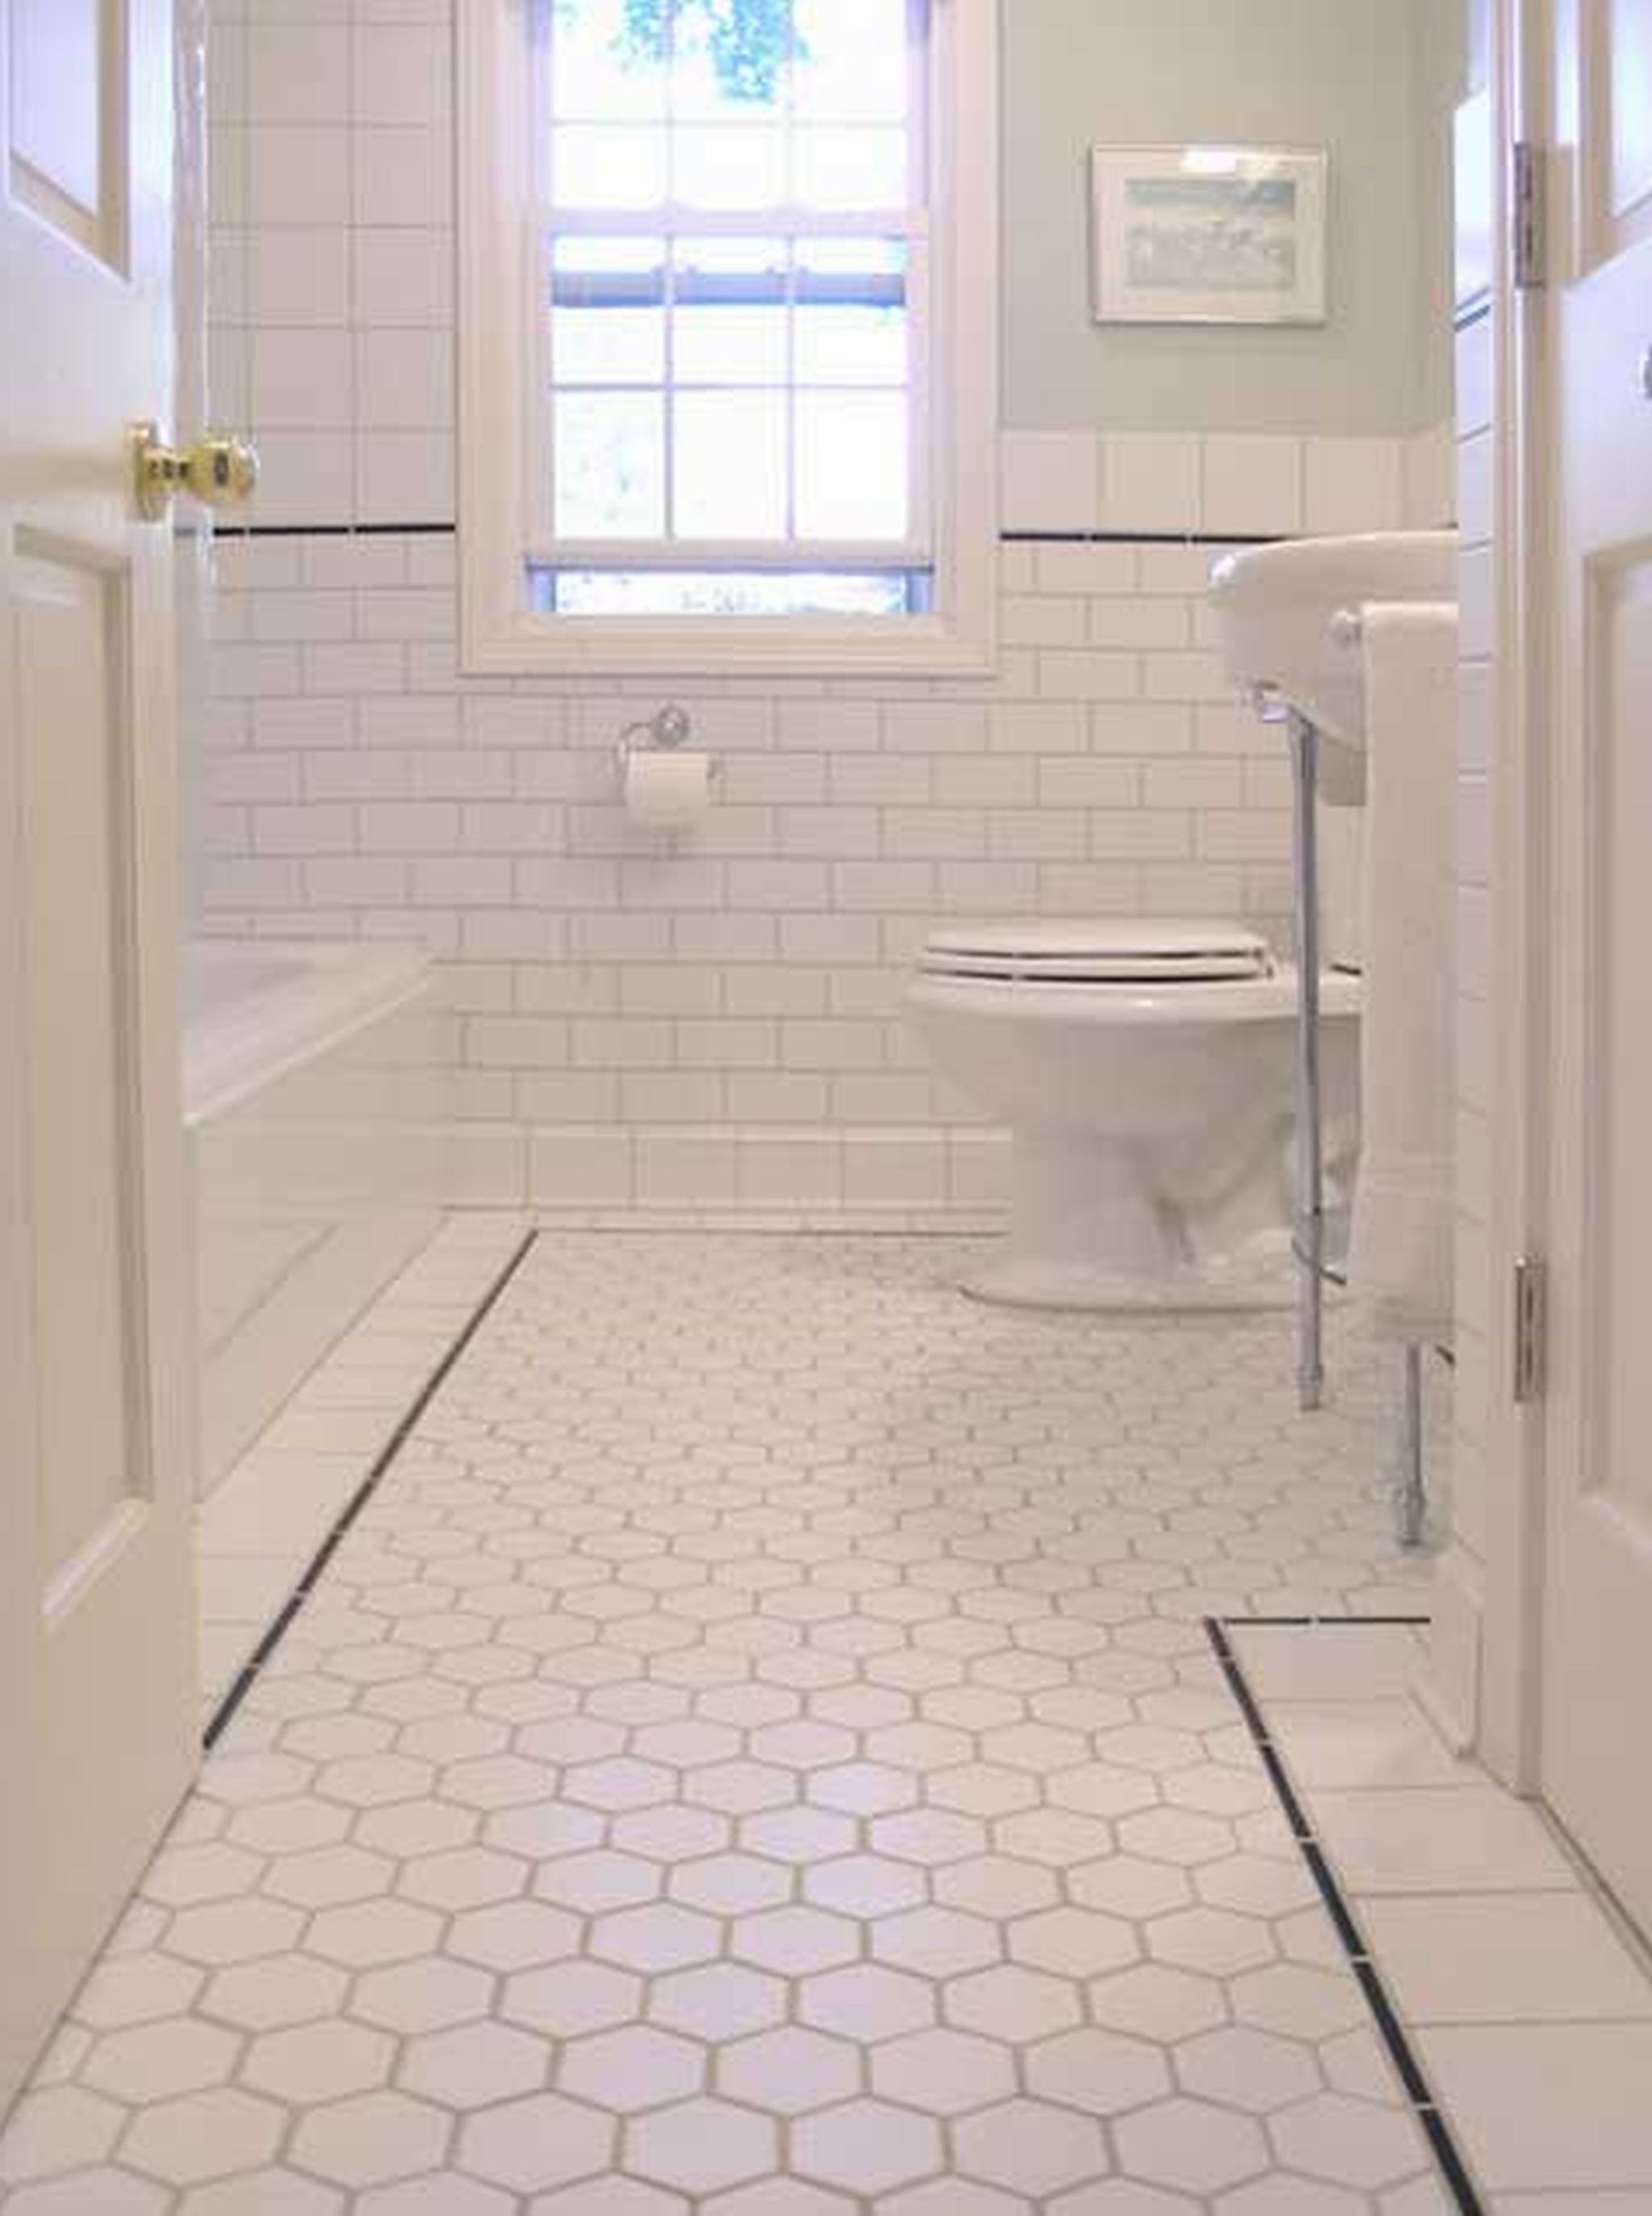 Tile Window In Nice Tile Window Without Curtain In Small Bathroom With Pentagon Bathroom Floor Tile Ideas And Low Bathtub Near Casual Door Model Bathroom A Safe Bathroom Floor Tile Ideas For Safe And Healthy Bathroom